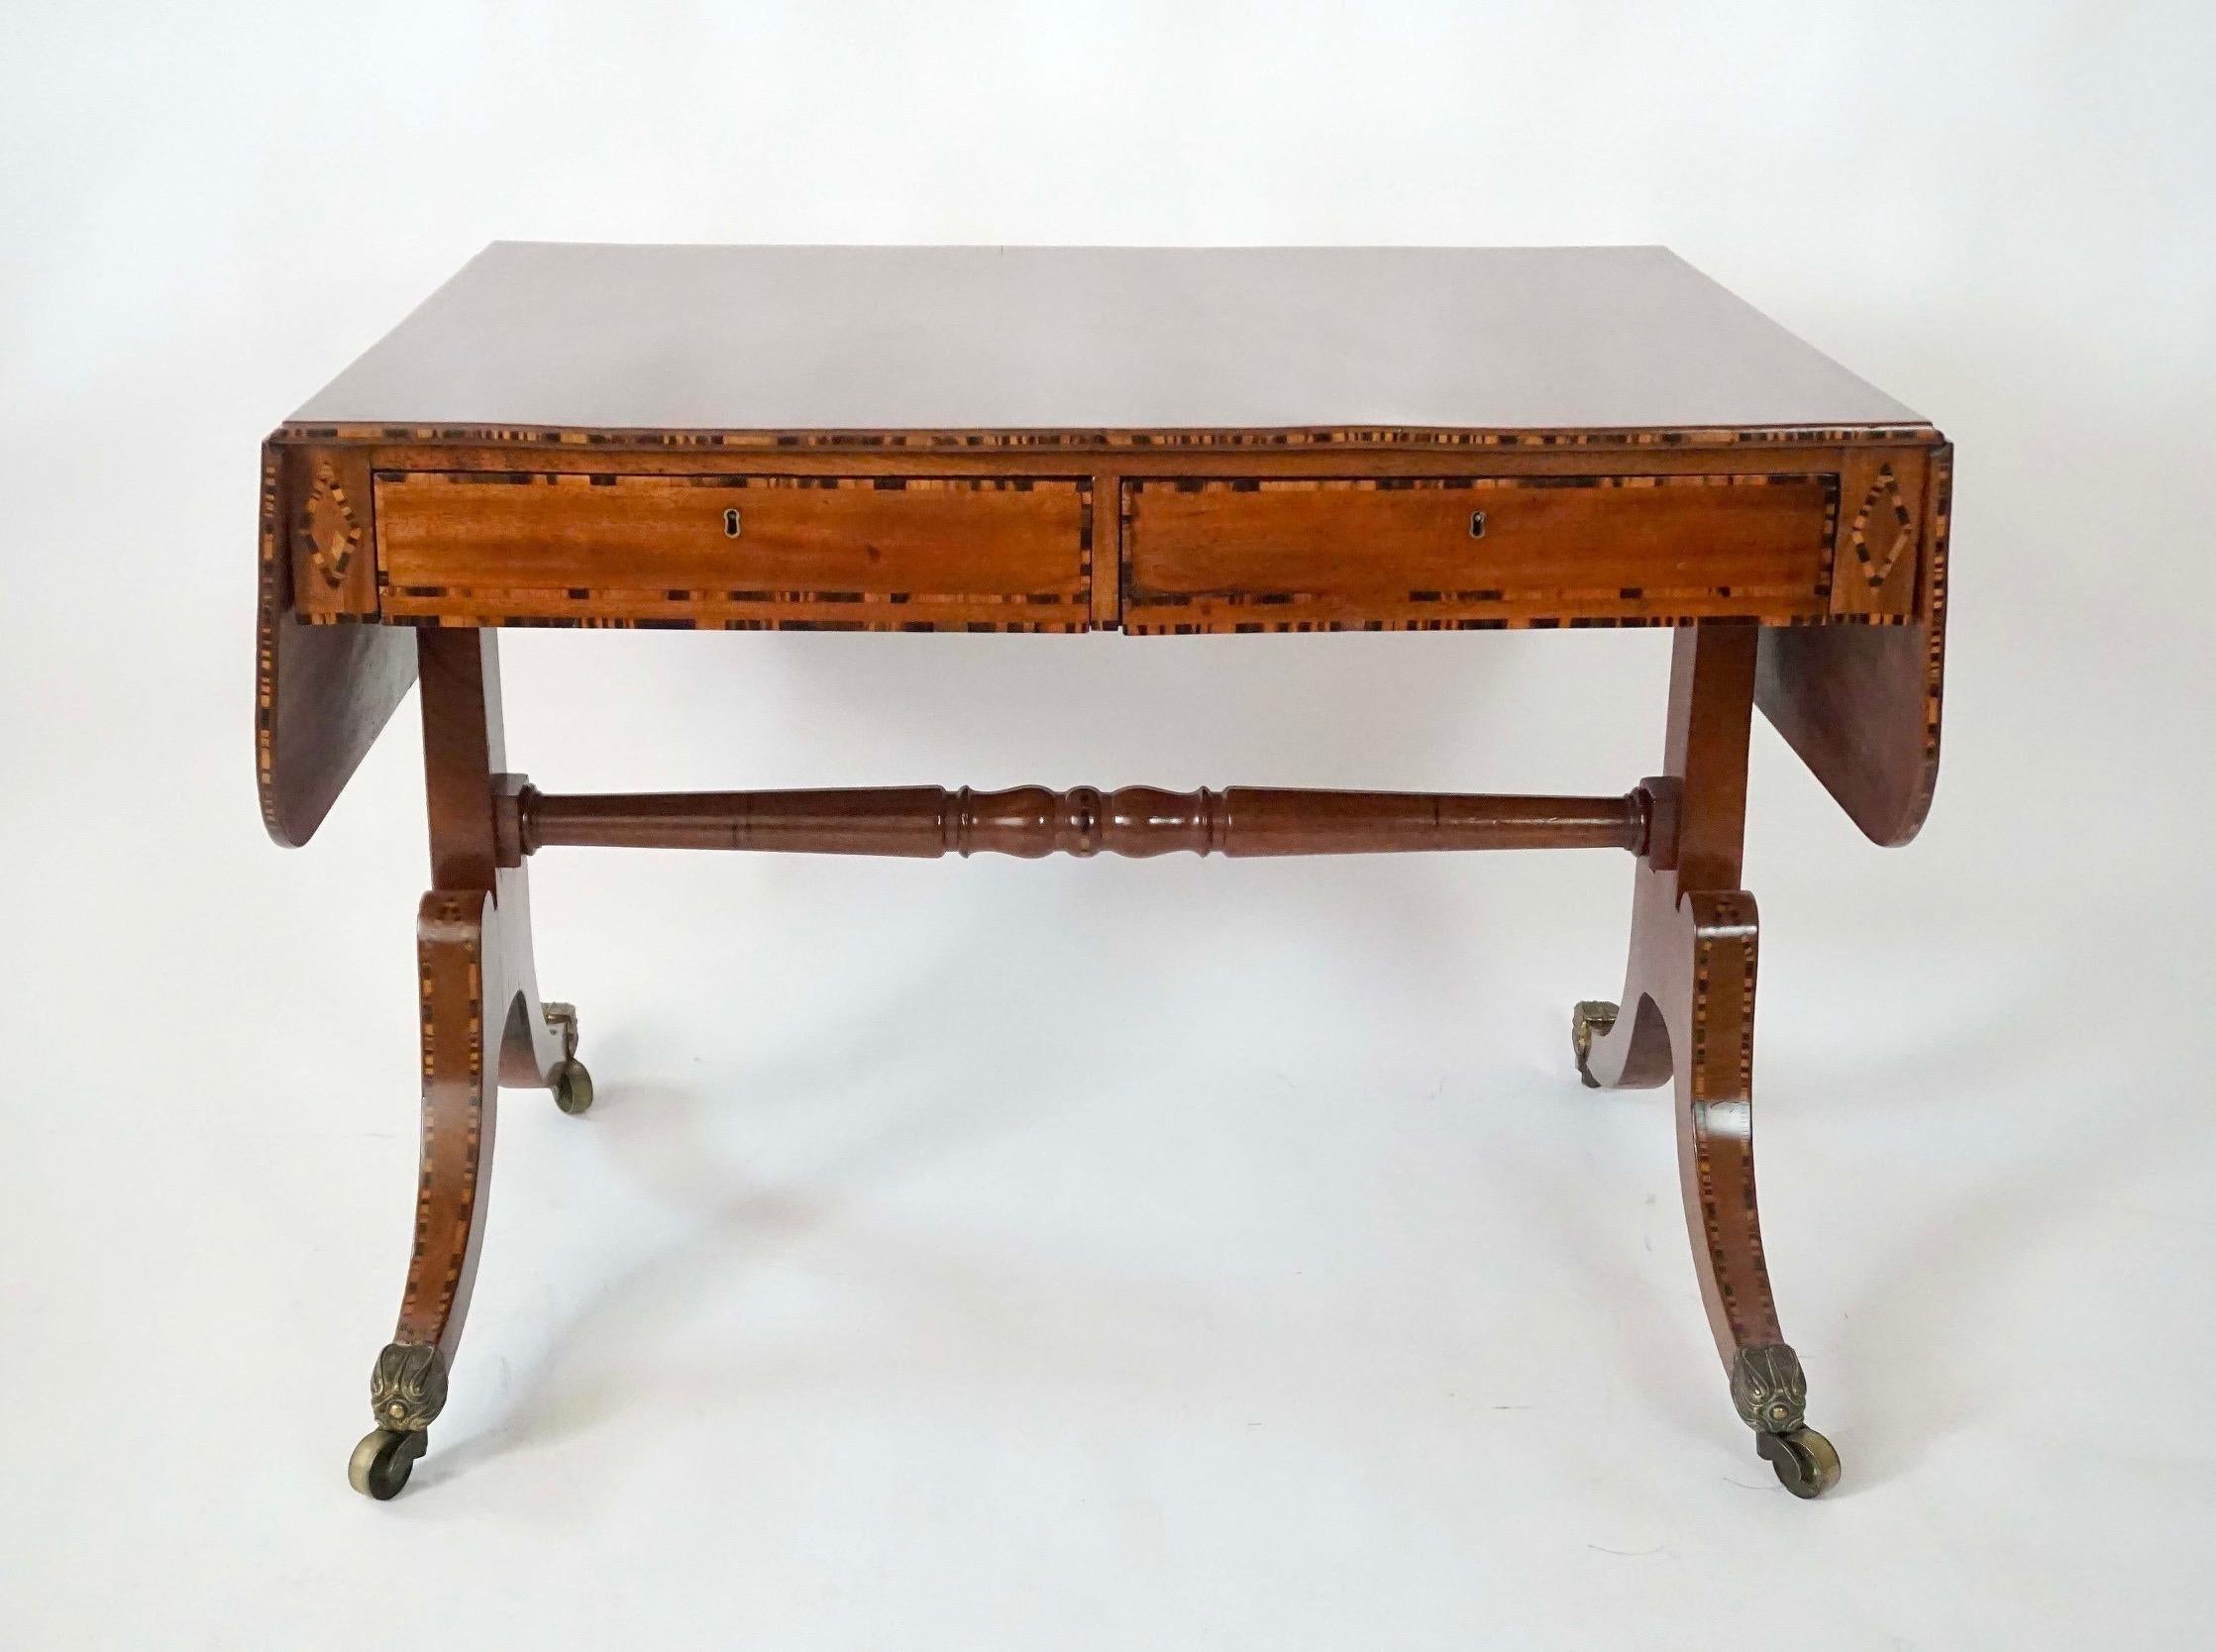 A very fine and elegant circa 1820 English regency solid mahogany drop-leaf two drawer sofa table by renowned London cabinet-maker William Wilkinson of false double-sided form having eye-dazzling calamander inlay to edges, drawer-fronts, reverse